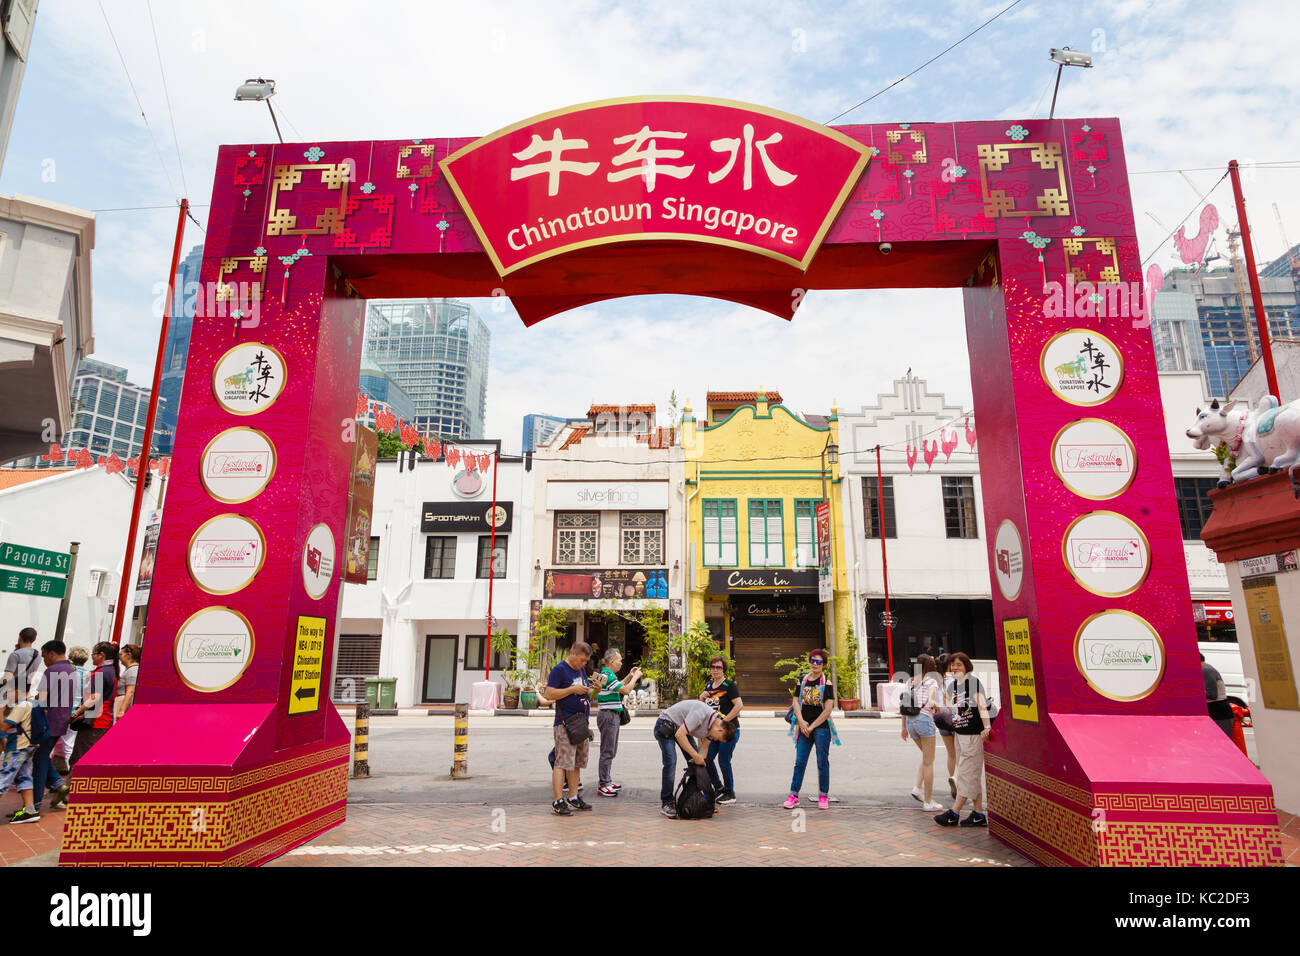 SINGAPORE - SEPTEMBER 11, 2017: Visitors taking pictures at Chinatown where old Victorian-style shophouses are a trademark of this popular area. Singa Stock Photo